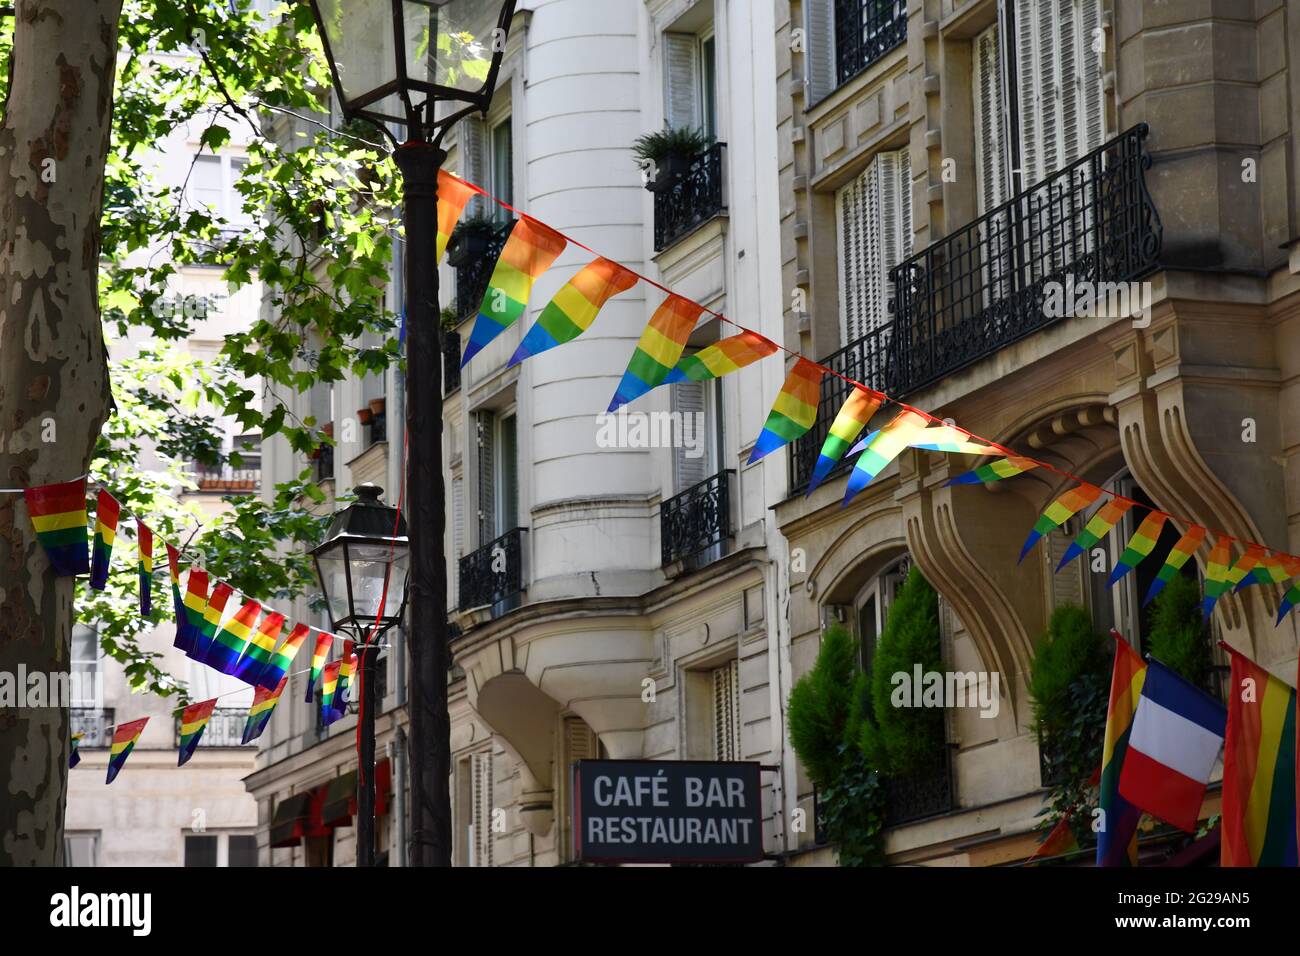 Decoration of triangle shape banners in colors of Lgbtq flags hanging between vintage lantern streetlights and ornate stone house with balconies. Gay Stock Photo